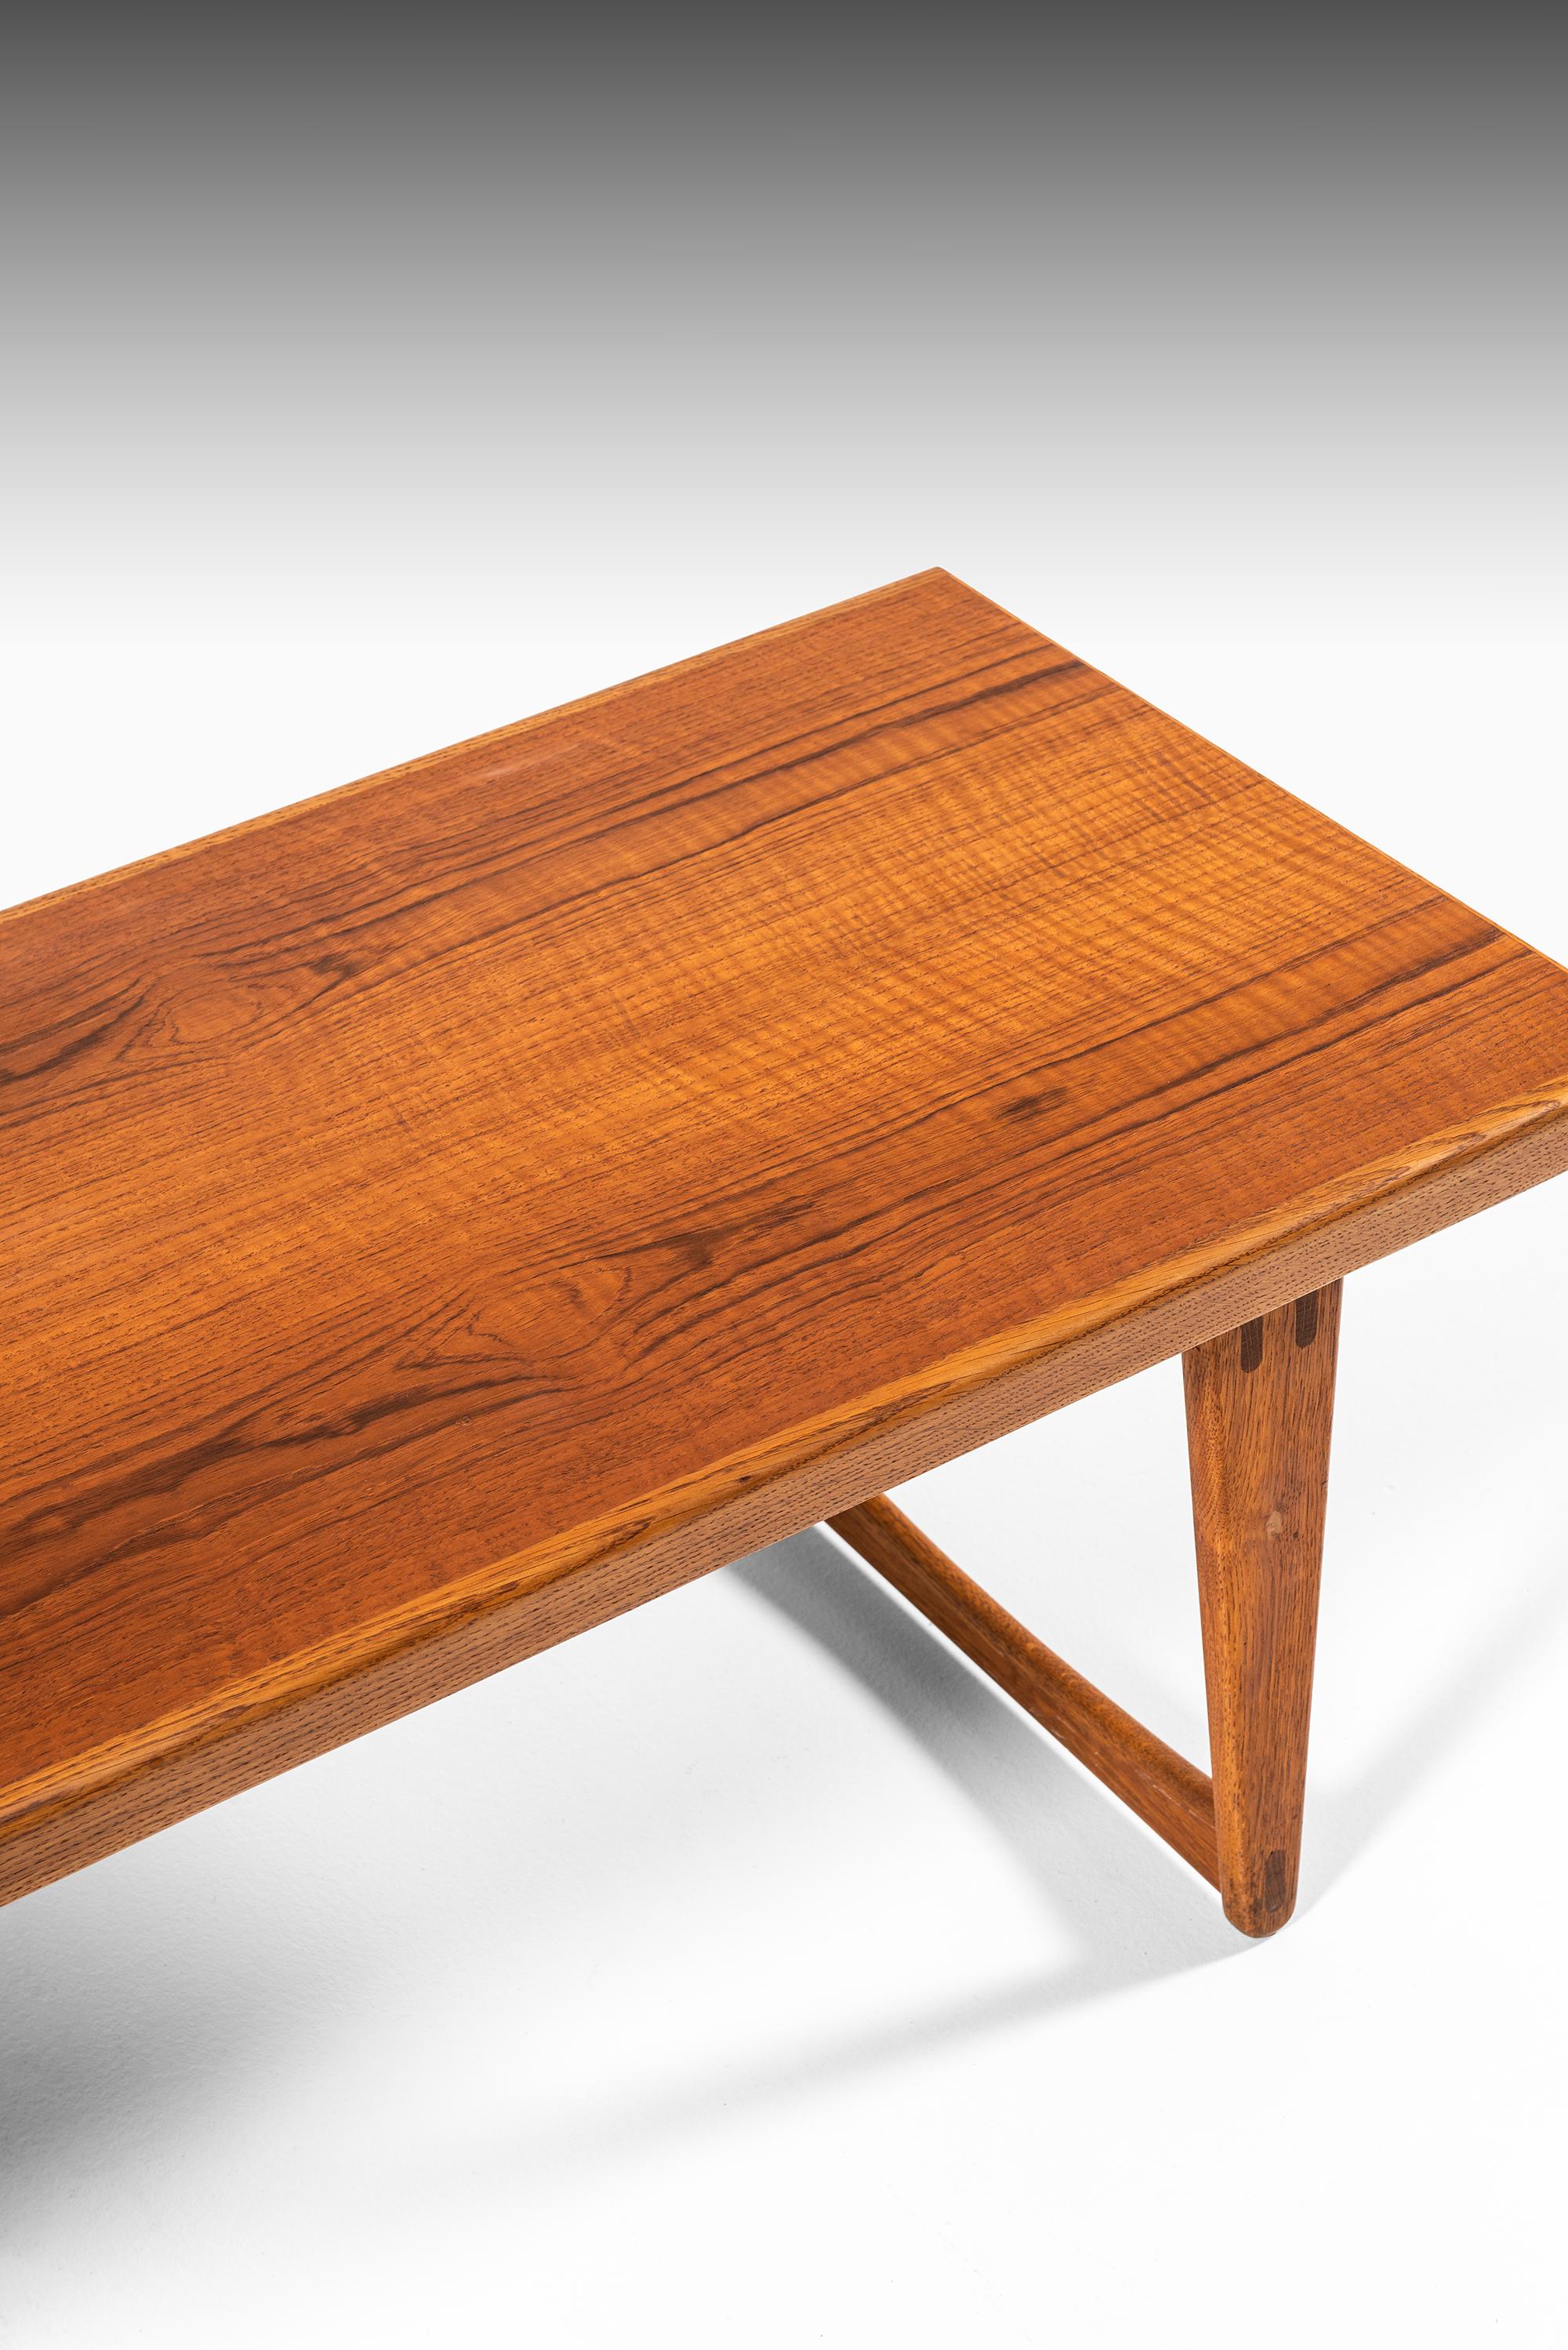 Rare coffee table / side table / bench designed by Yngve Ekström. Produced by Westbergs in Tranås, Sweden.